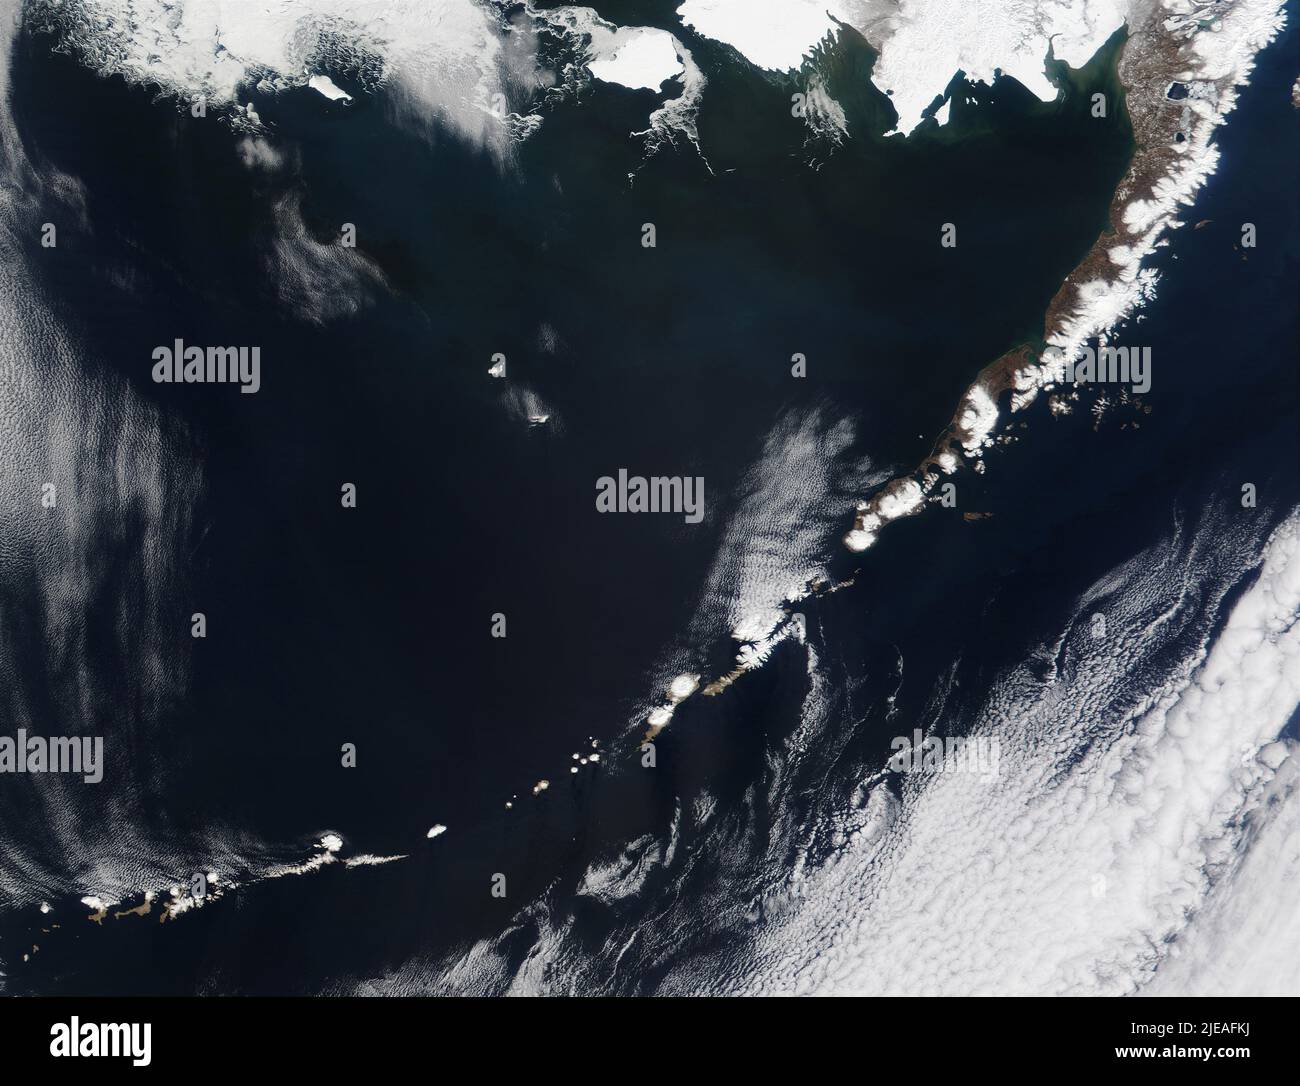 Alaska's Aleutian Islands, northern rim of the Pacific Ring of Fire. The circular white patches of some of the volcanoes' snow-filled craters can be s Stock Photo